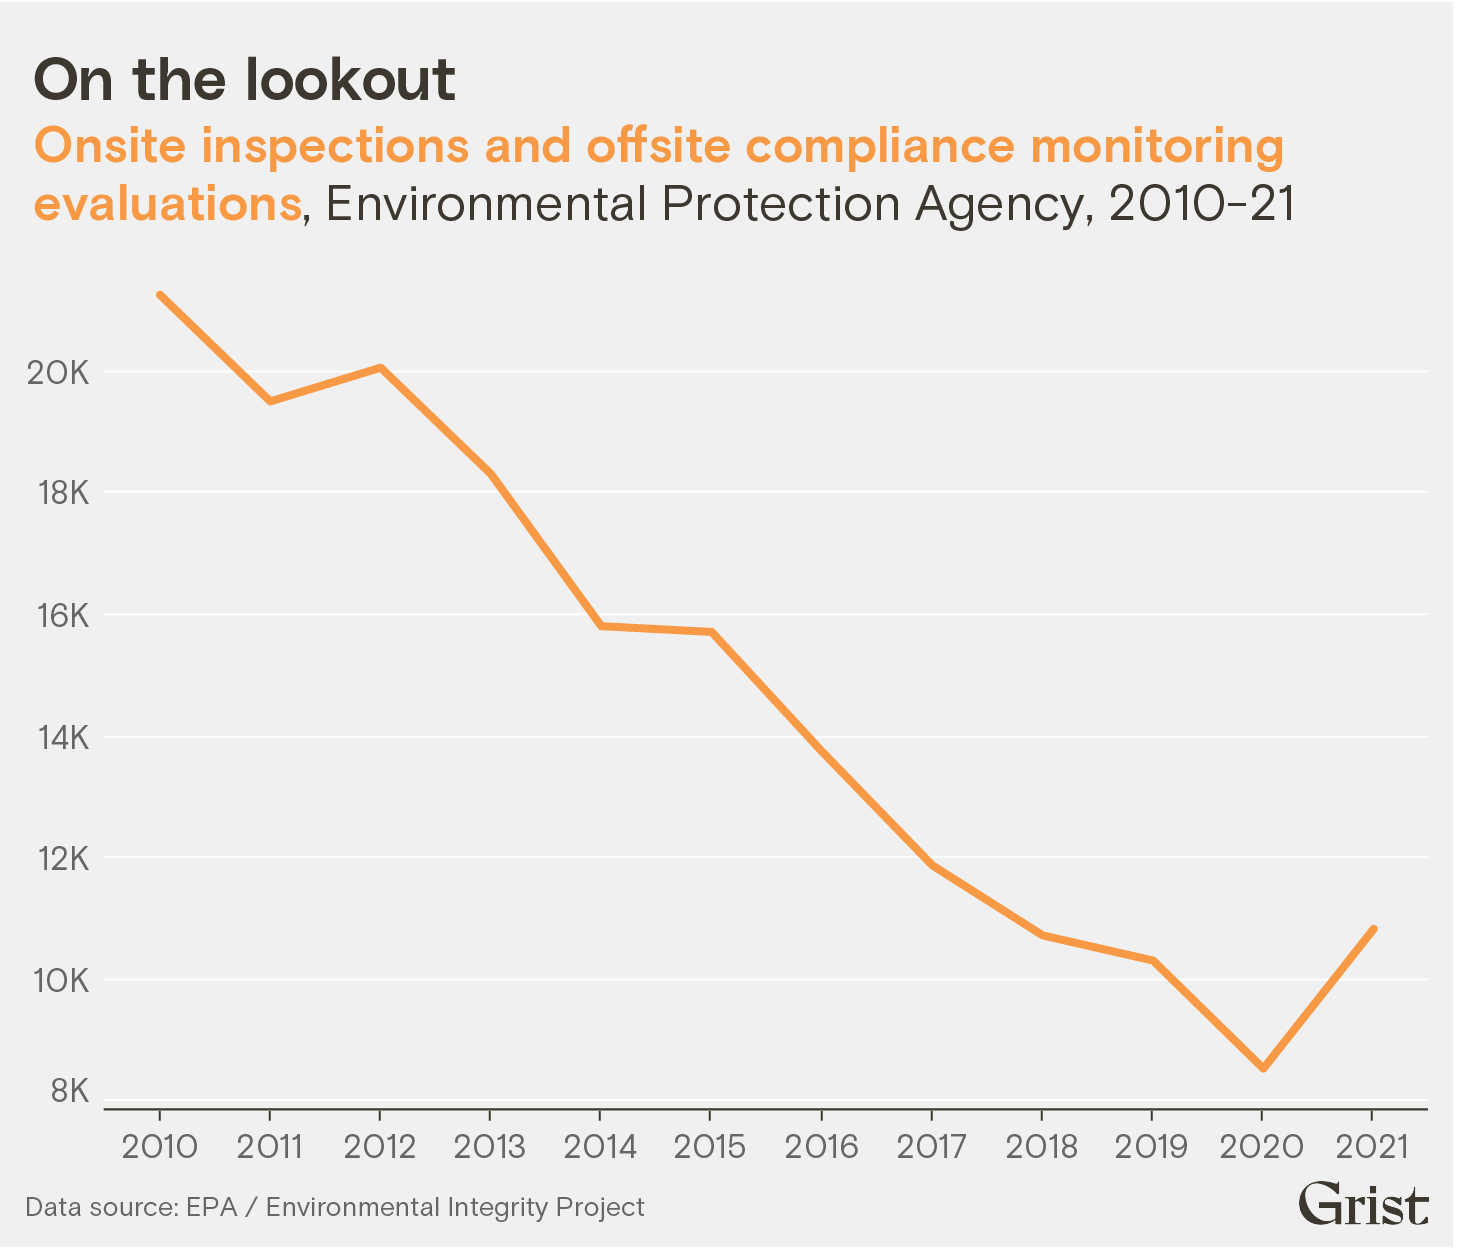 A line graph showing the change in onsite inspections and offsite compliance monitoring evaluations y the EPA from 2010 to 2021. Inspections and evaluations have been trending steadily downward until 2021.